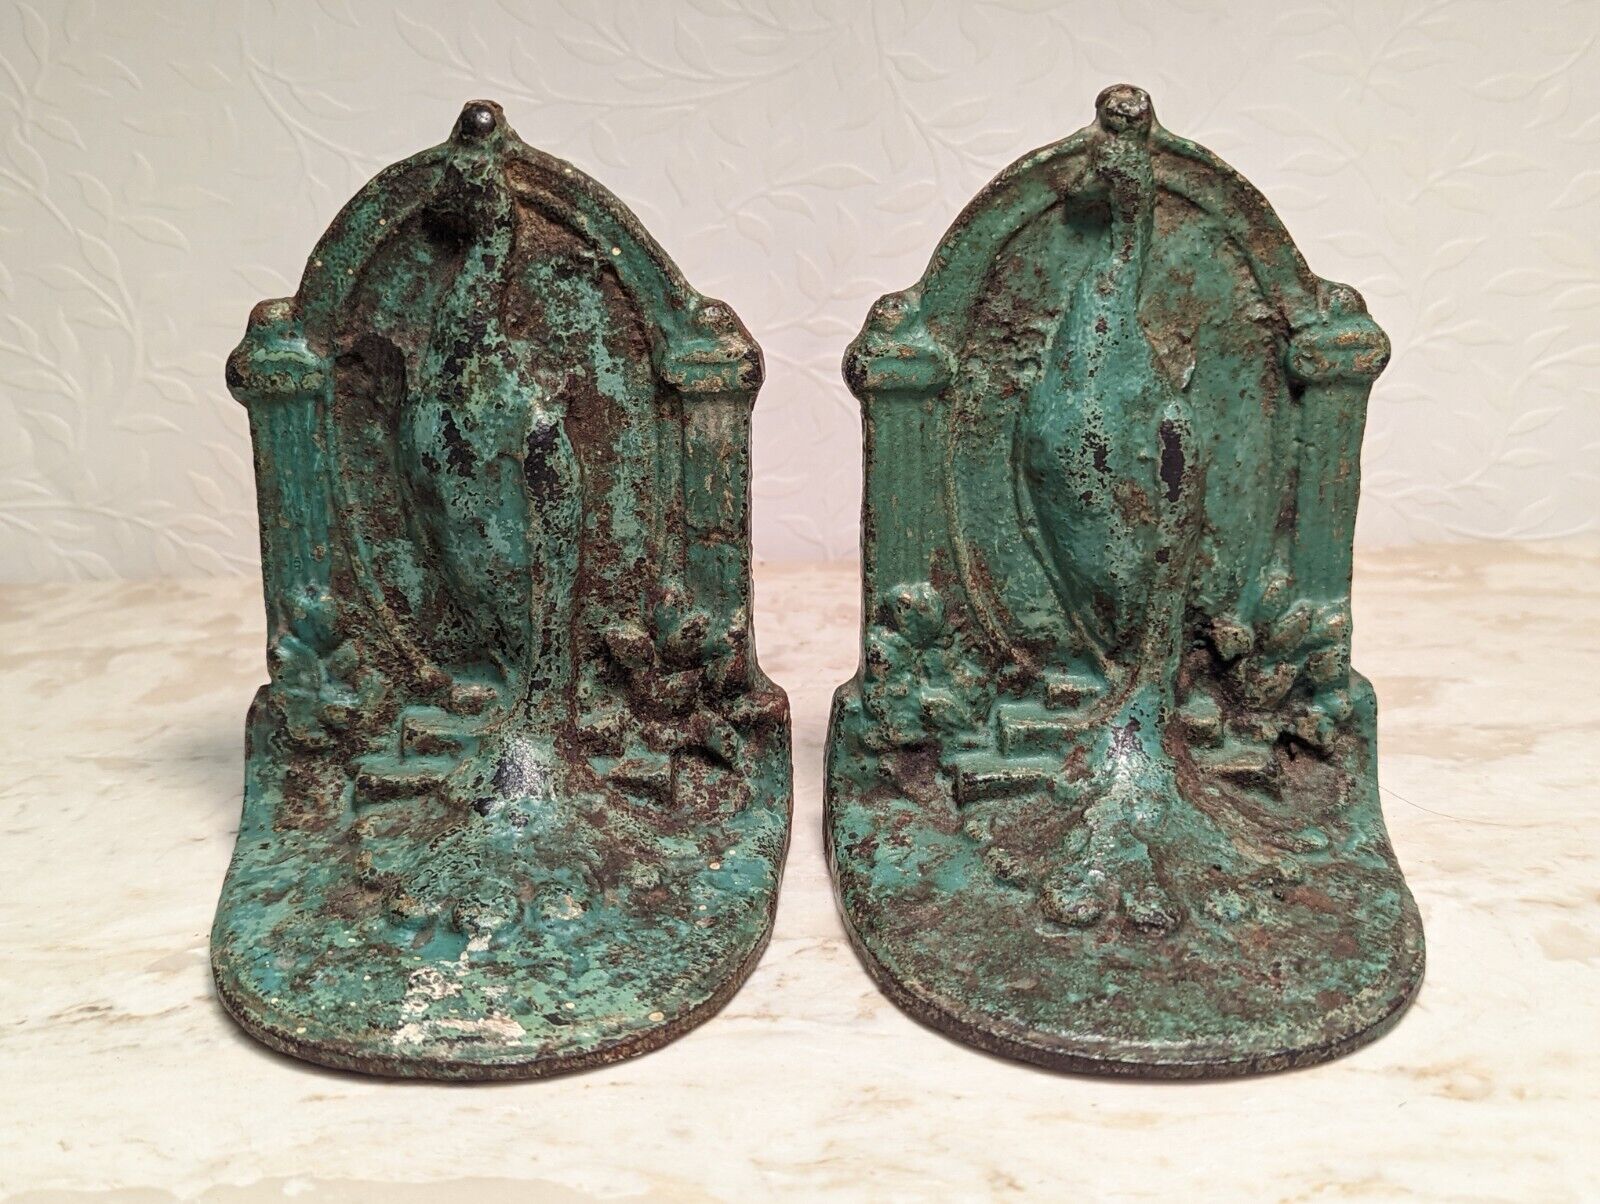 Art Deco Antique Peacock Cast Iron Book Ends Petina Green Painted Finish